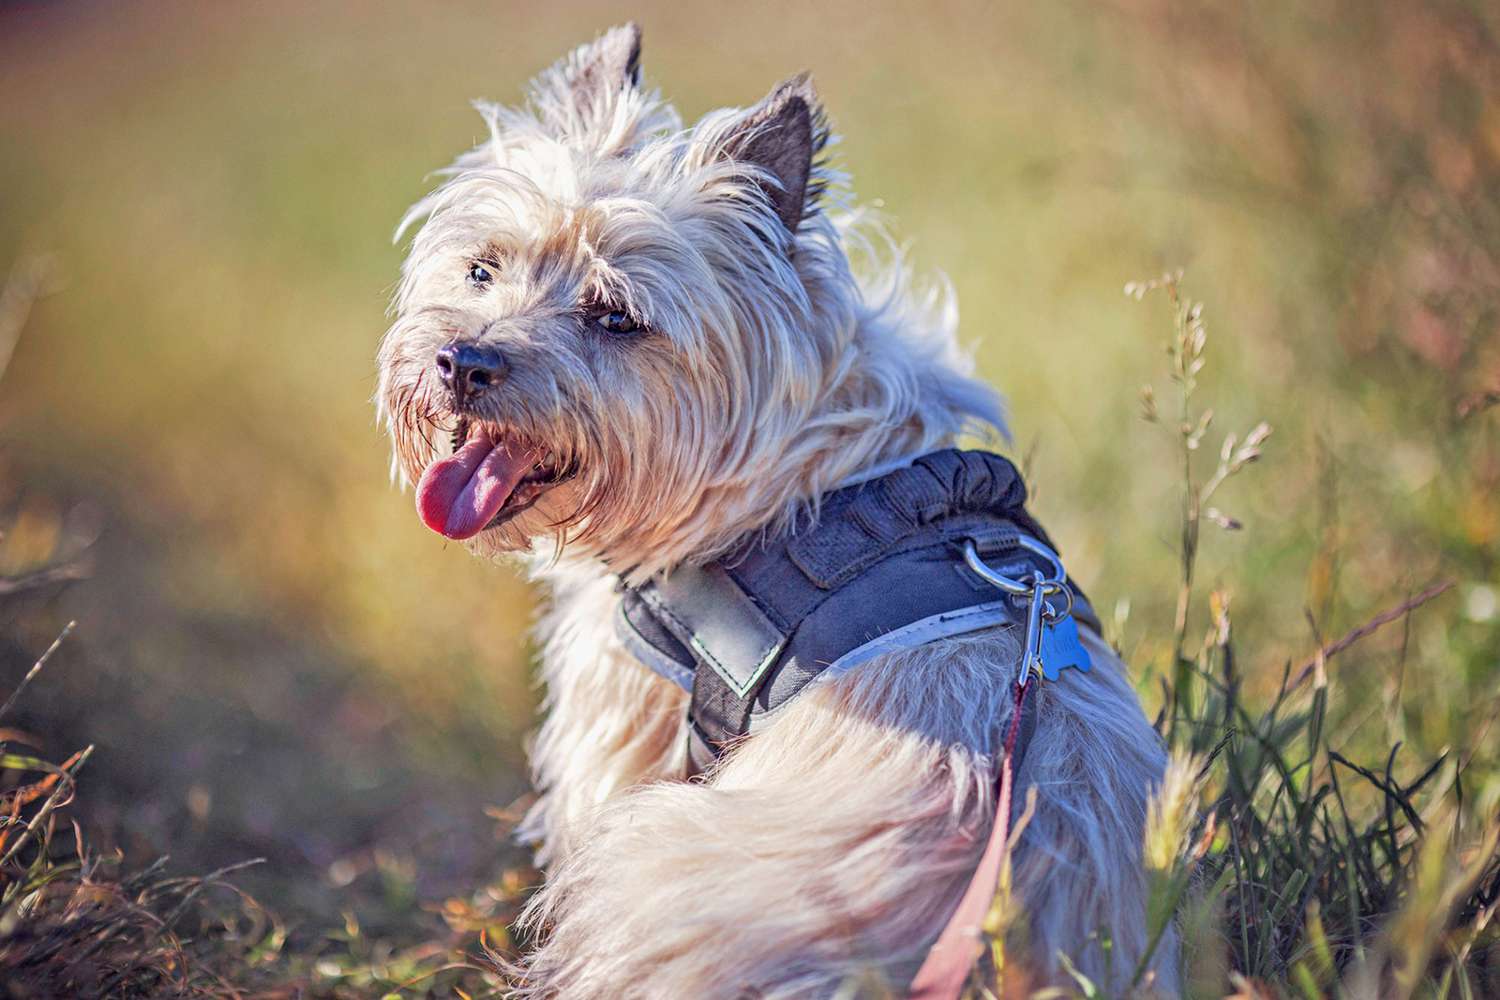 hiking  Cairn terrier wearing a harness sitting in long grass looking back at camera with her tongue out